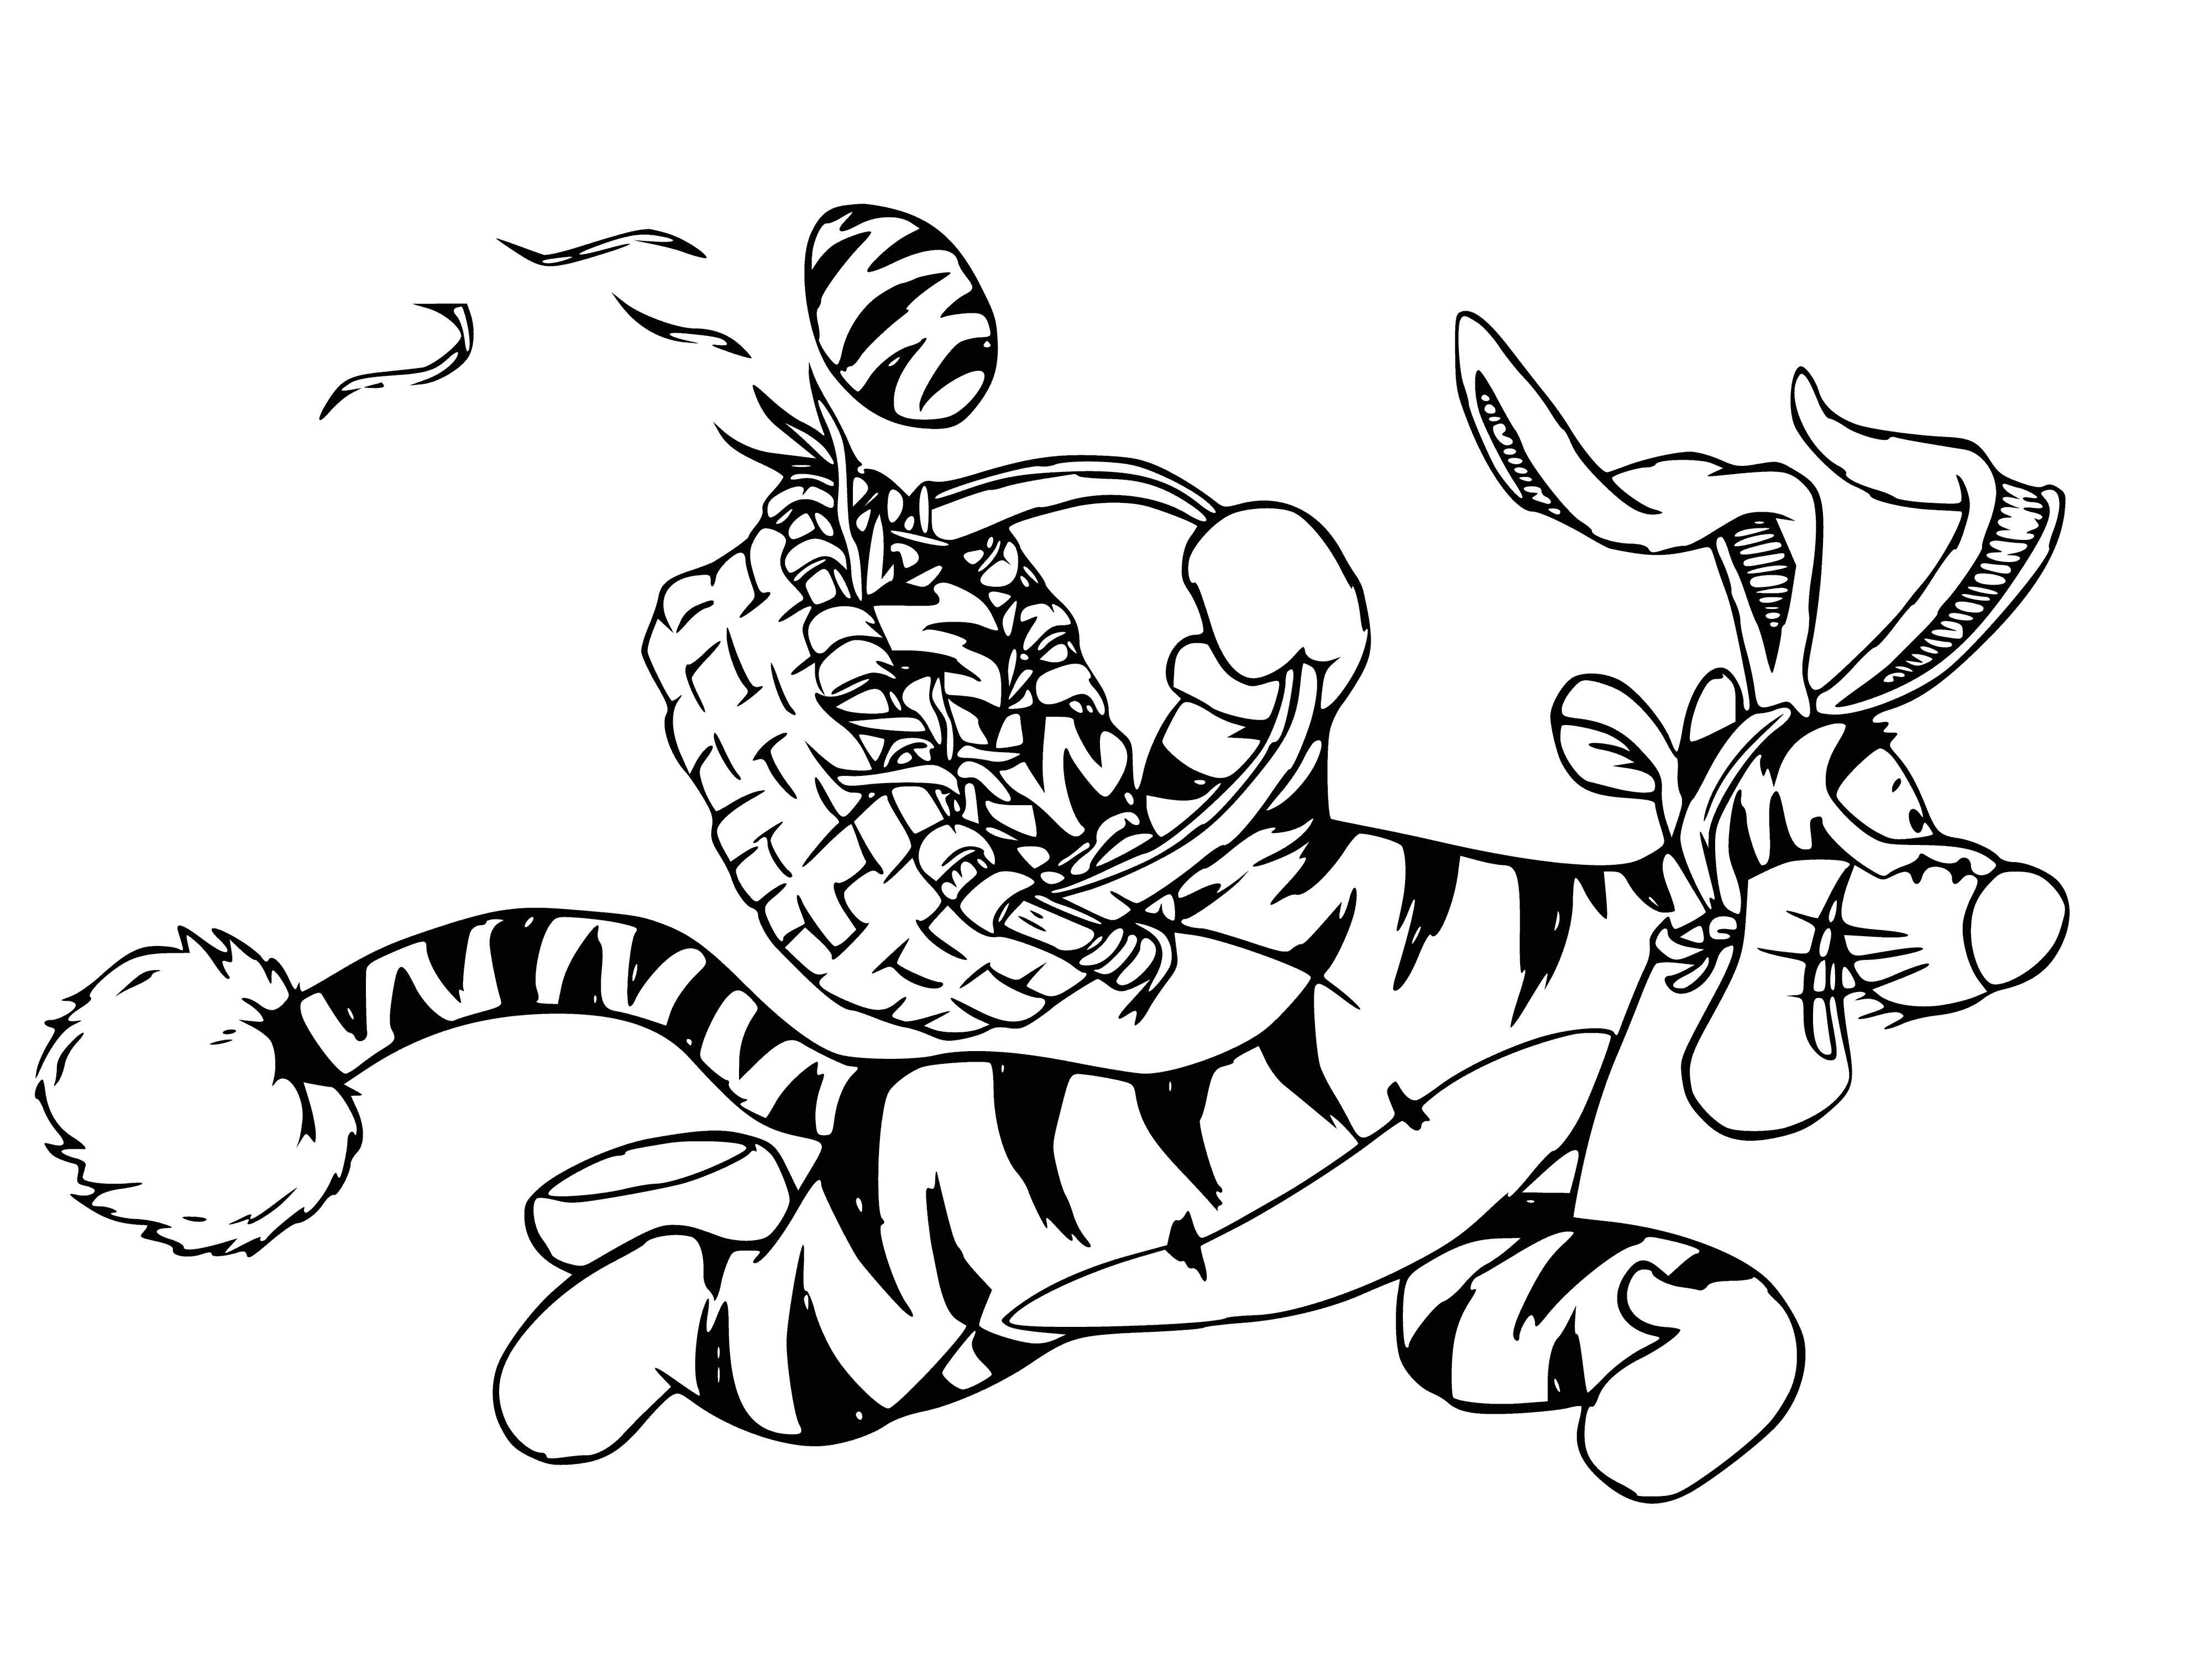 coloring page: Tiger stands in front of yellow Easter egg wearing blue collar and yellow bow tie. #ColoringPage